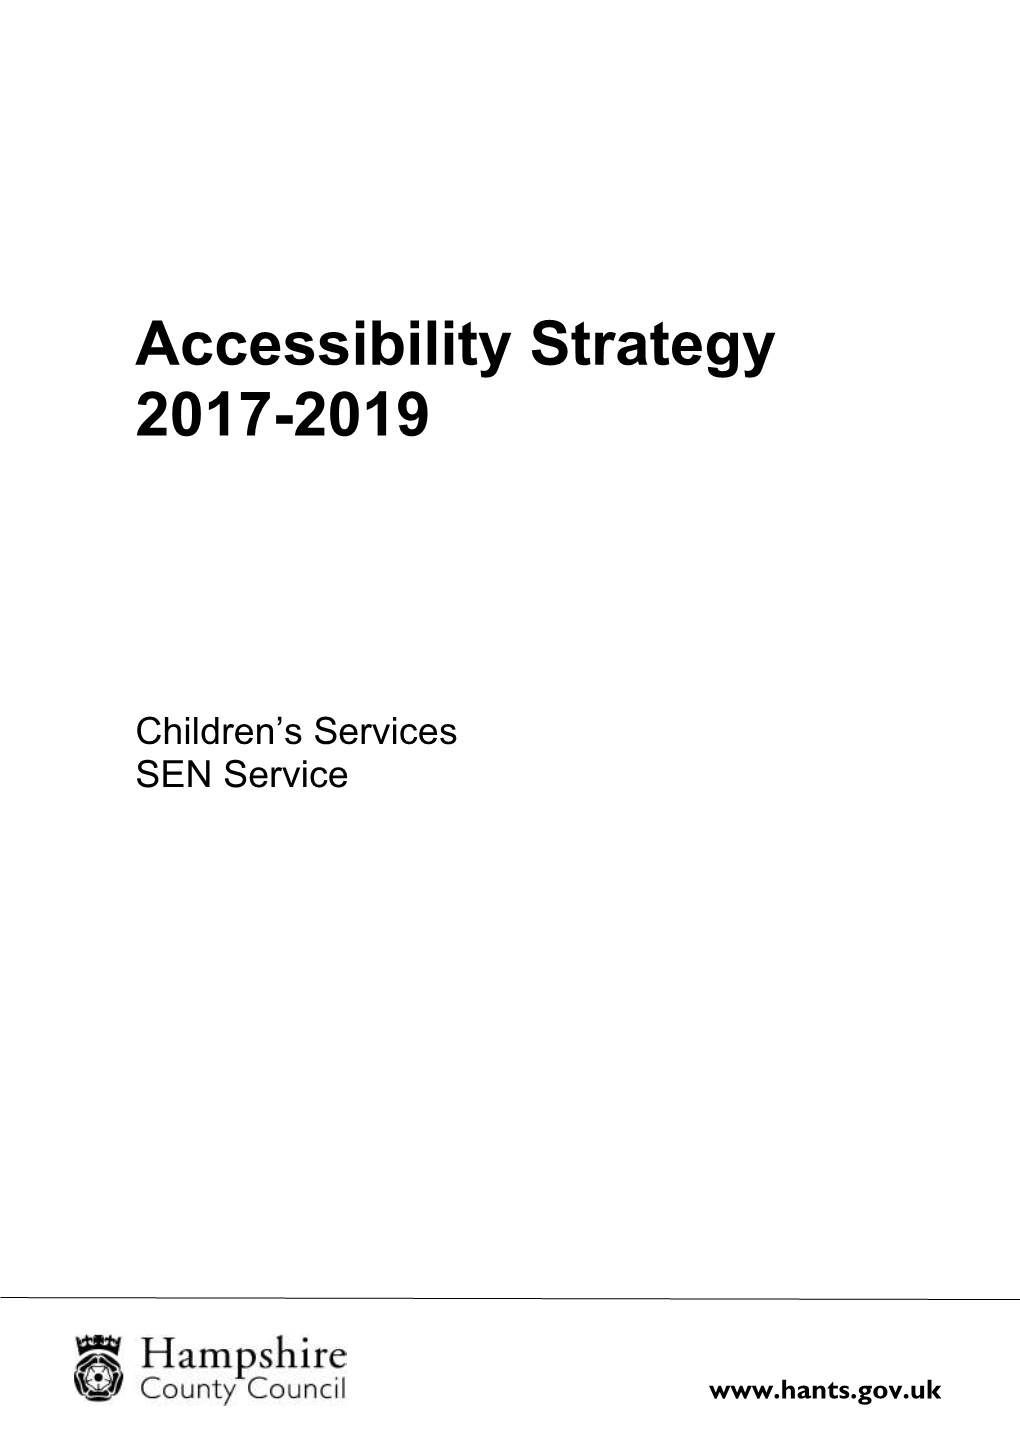 Accessibility Strategy 2017-2019